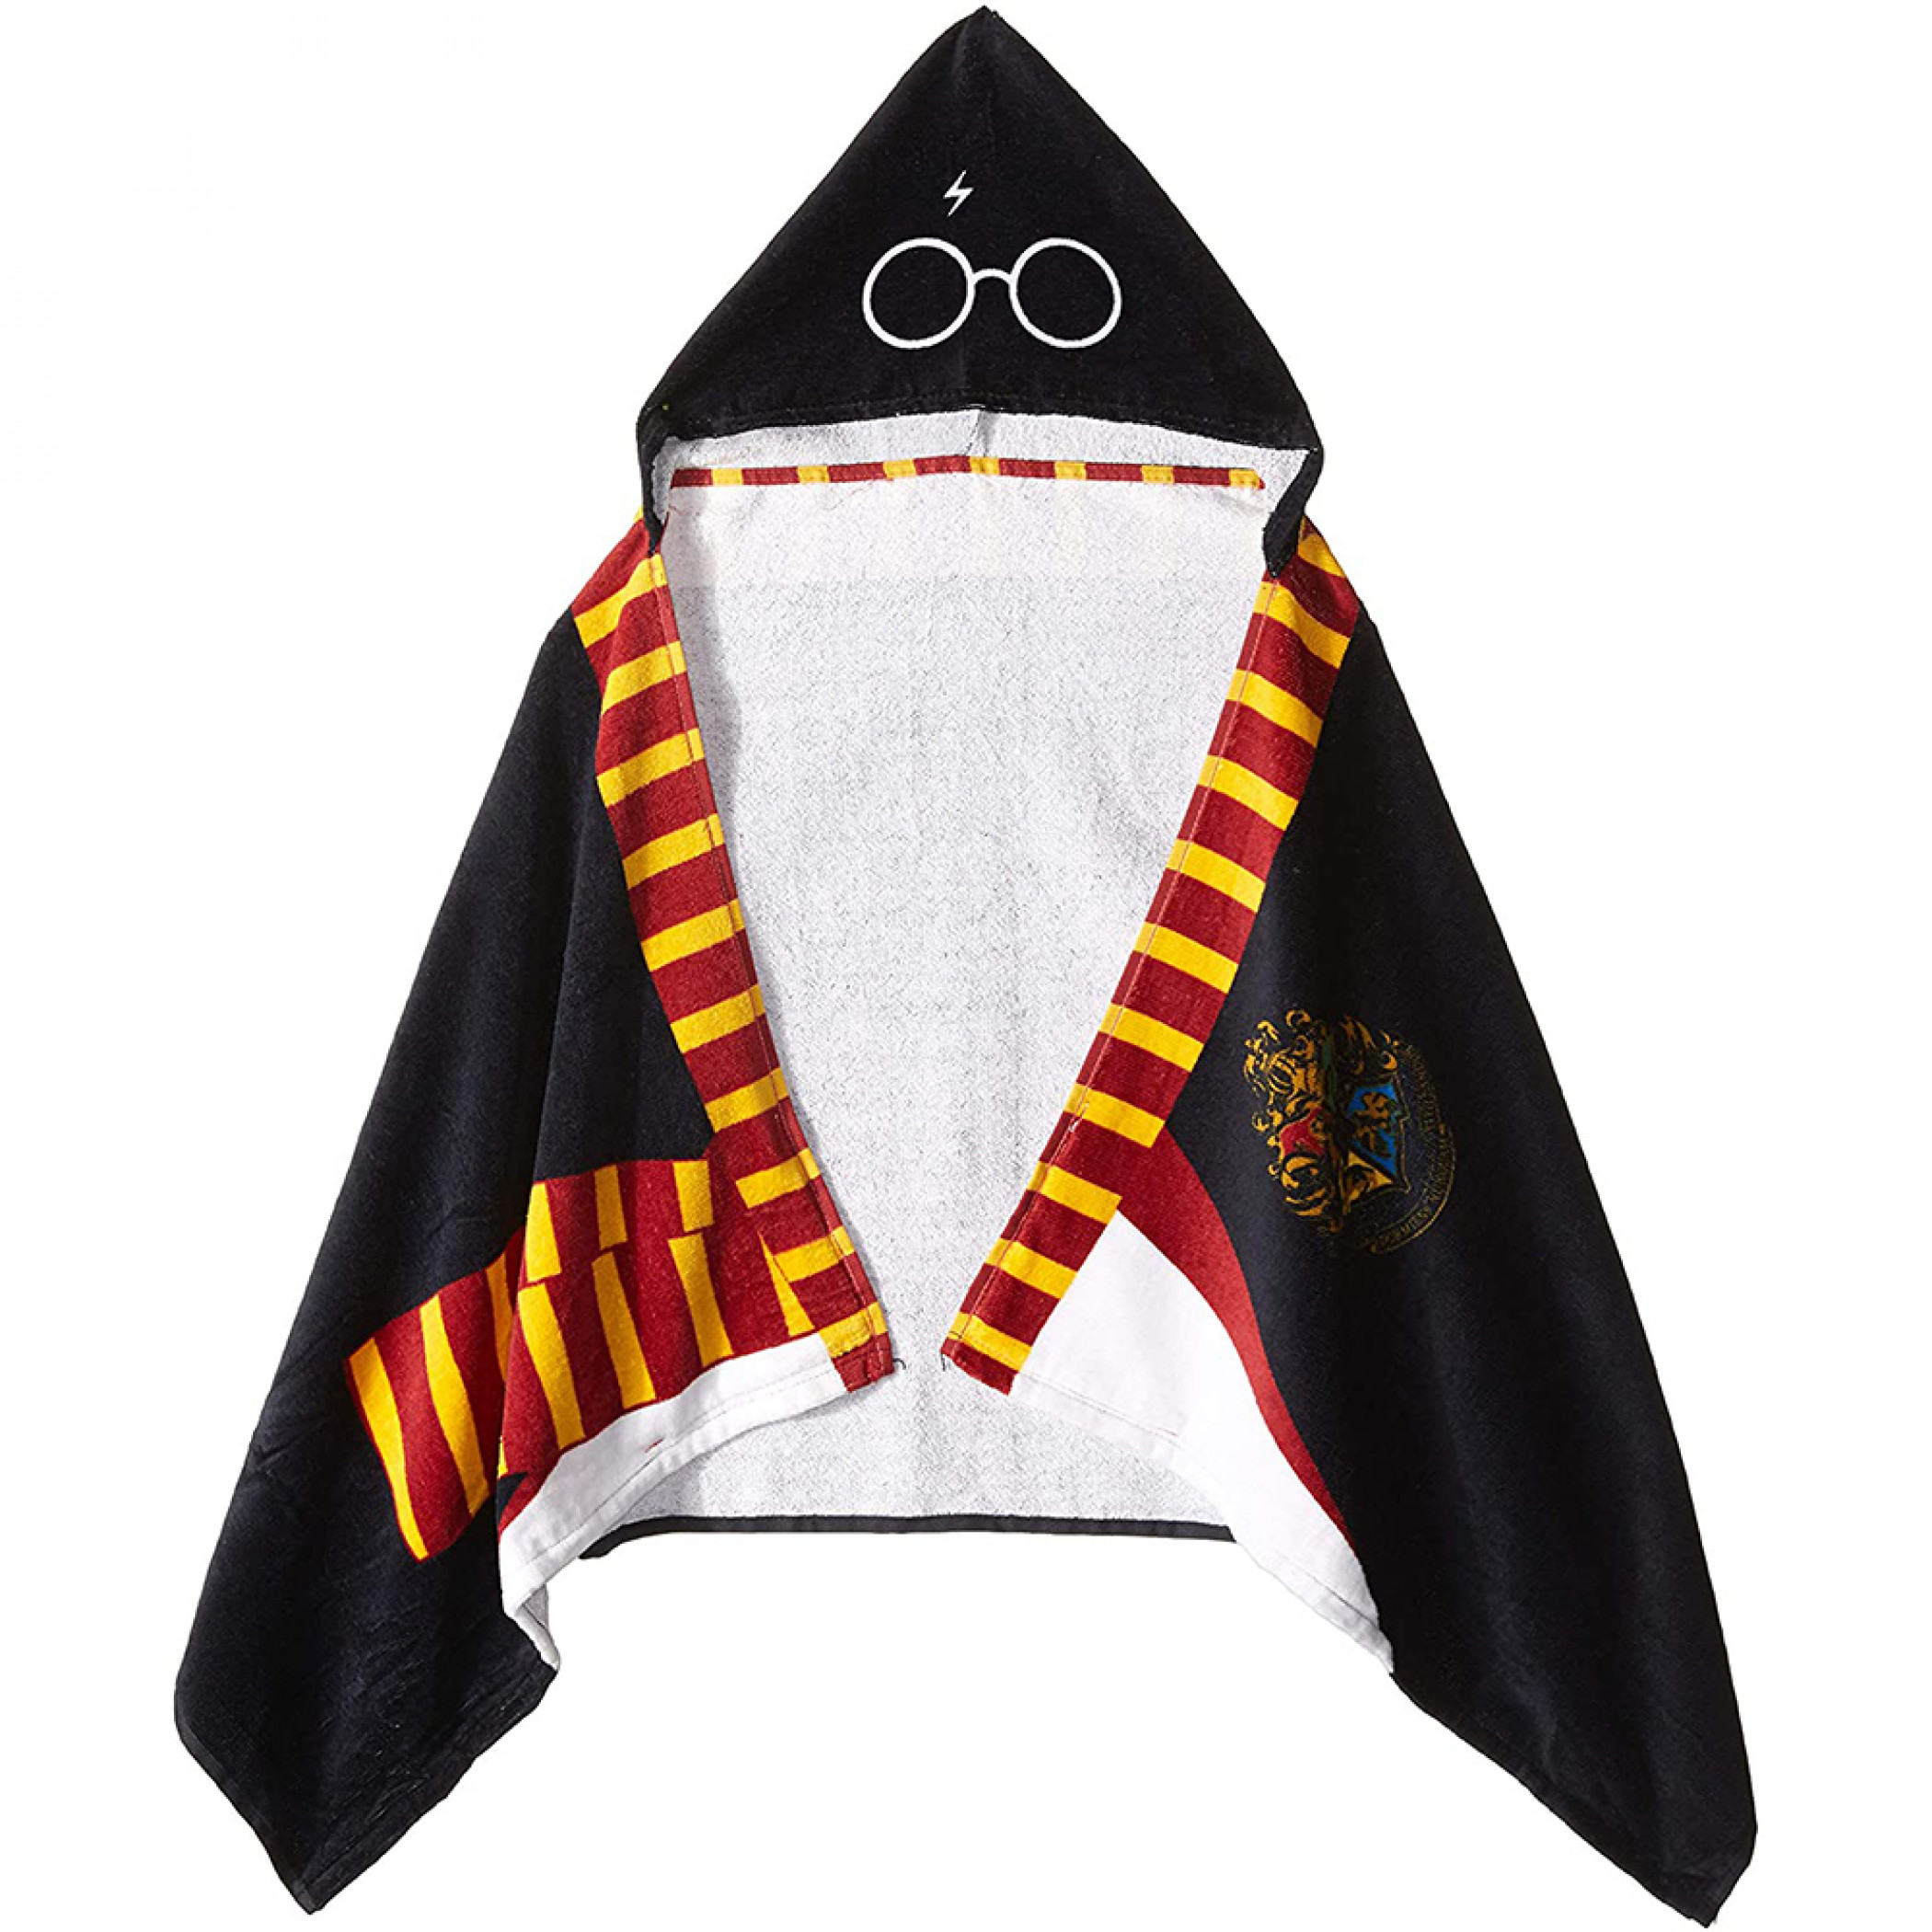 Harry Potter Great Hall Hooded Beach Towel